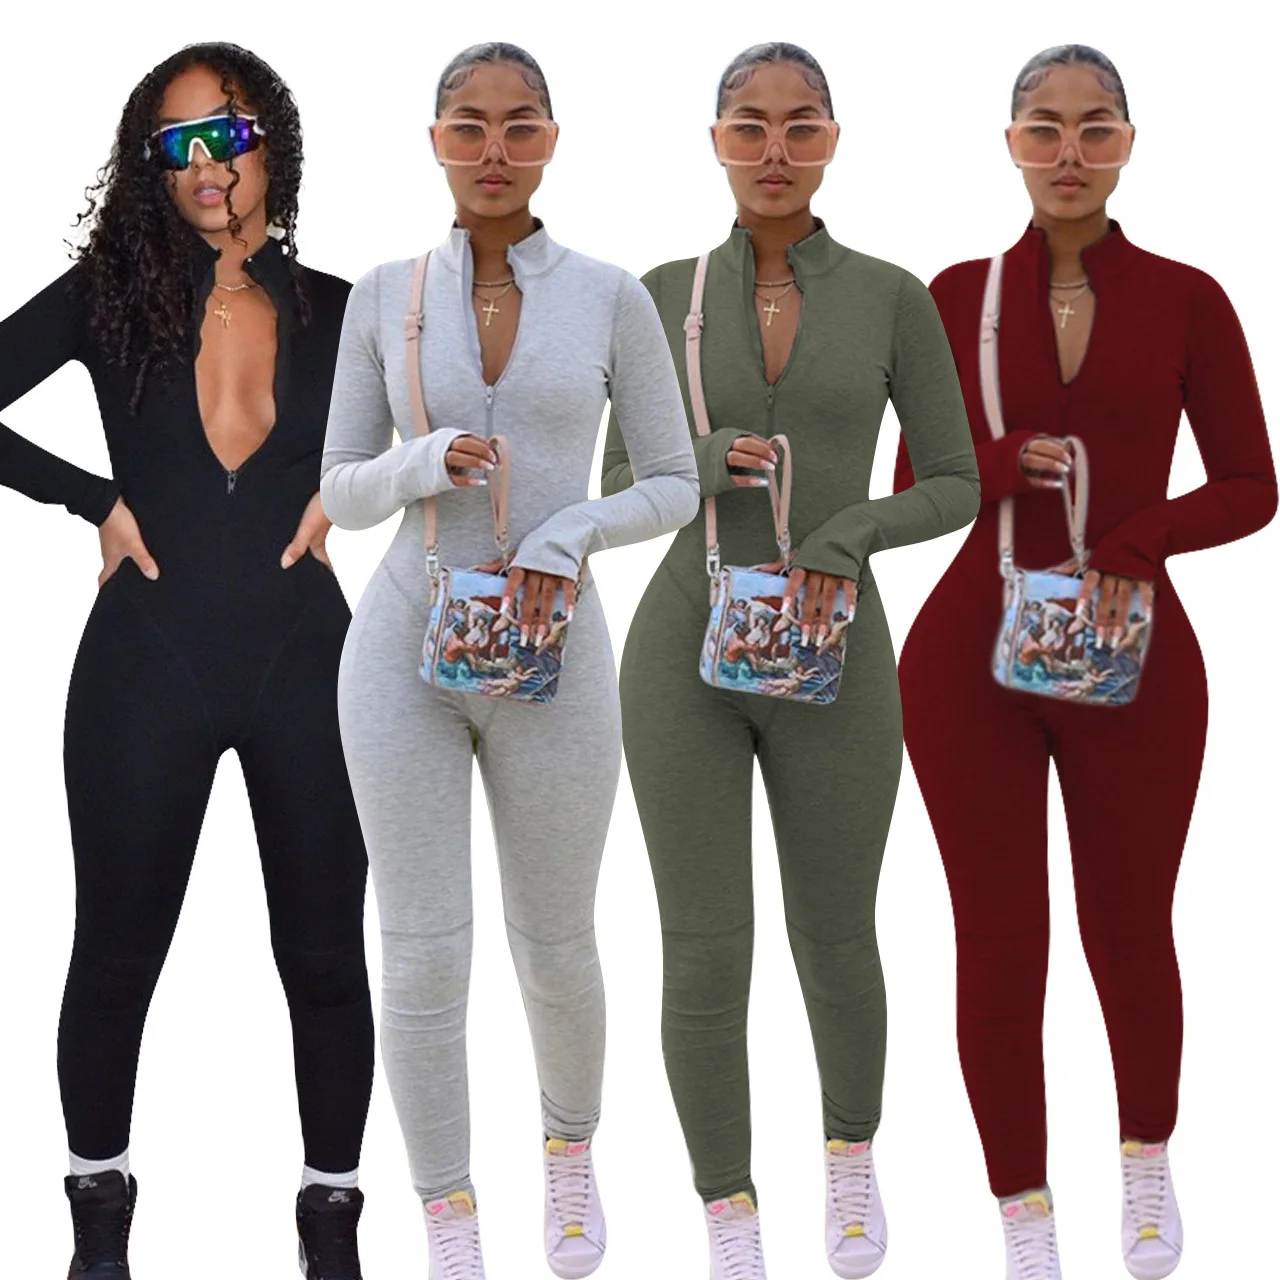 

Solid Color One Piece Rompers Fall Jumpsuits Ladies Sexy Zip Up Bodycon Playsuit Long Sleeve Jumpsuit For Women, 4 colors for selection